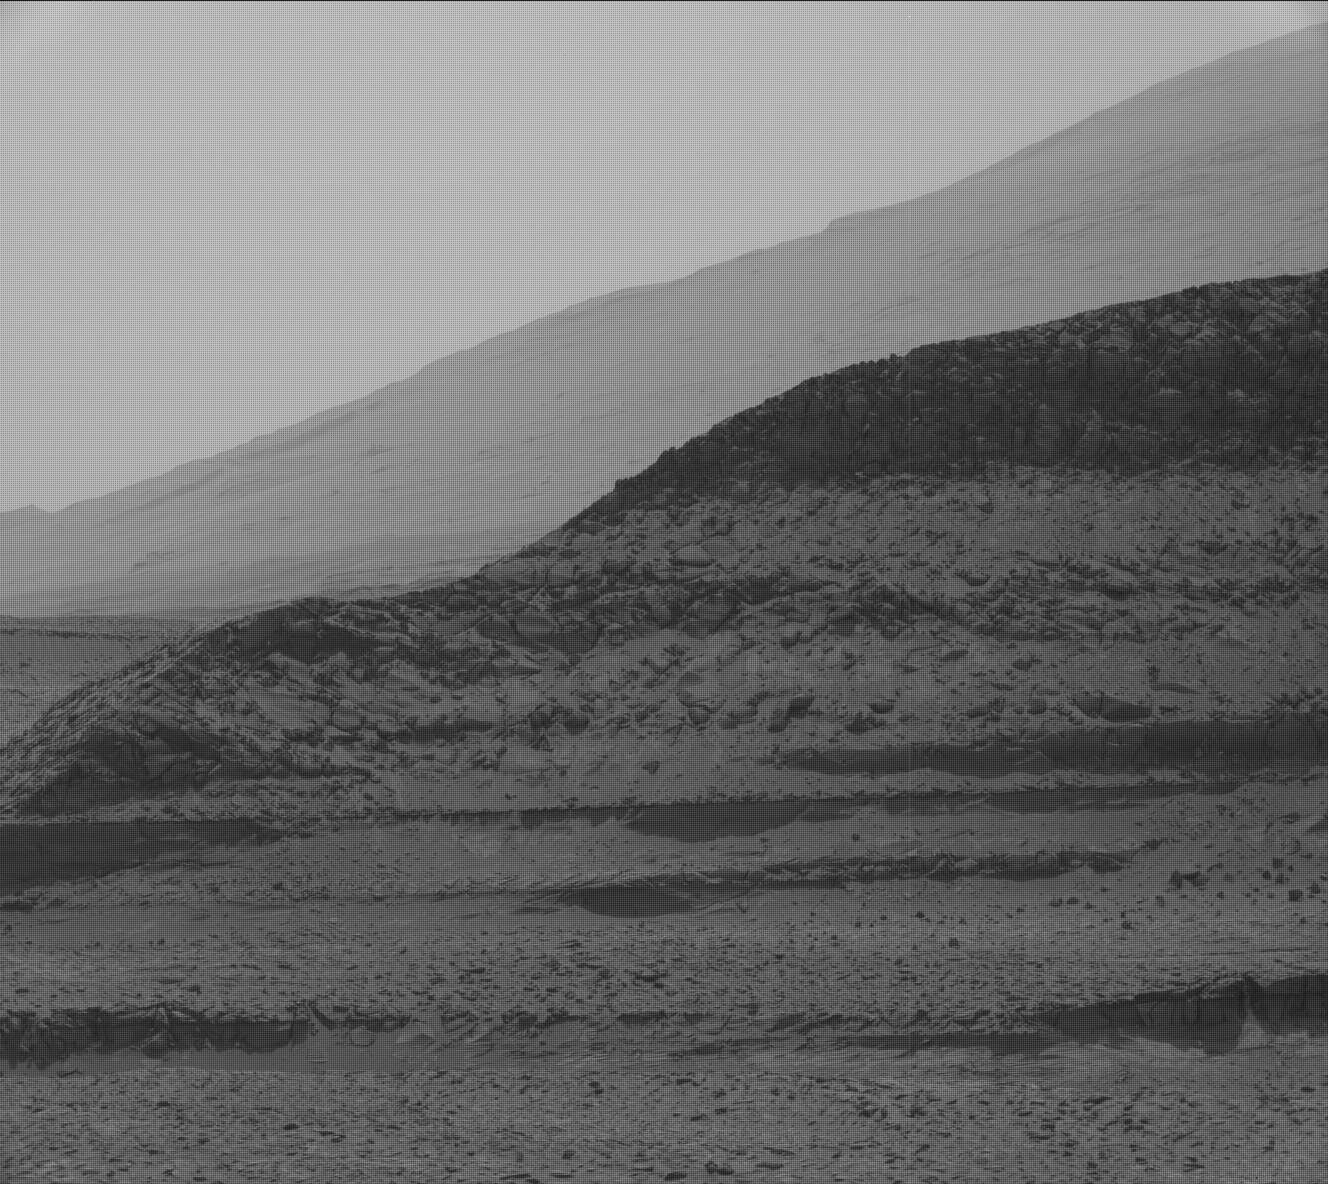 One Mastcam image that will be stitched together to make a large mosaic of the hills in the distance along the rover’s upcoming traverse.